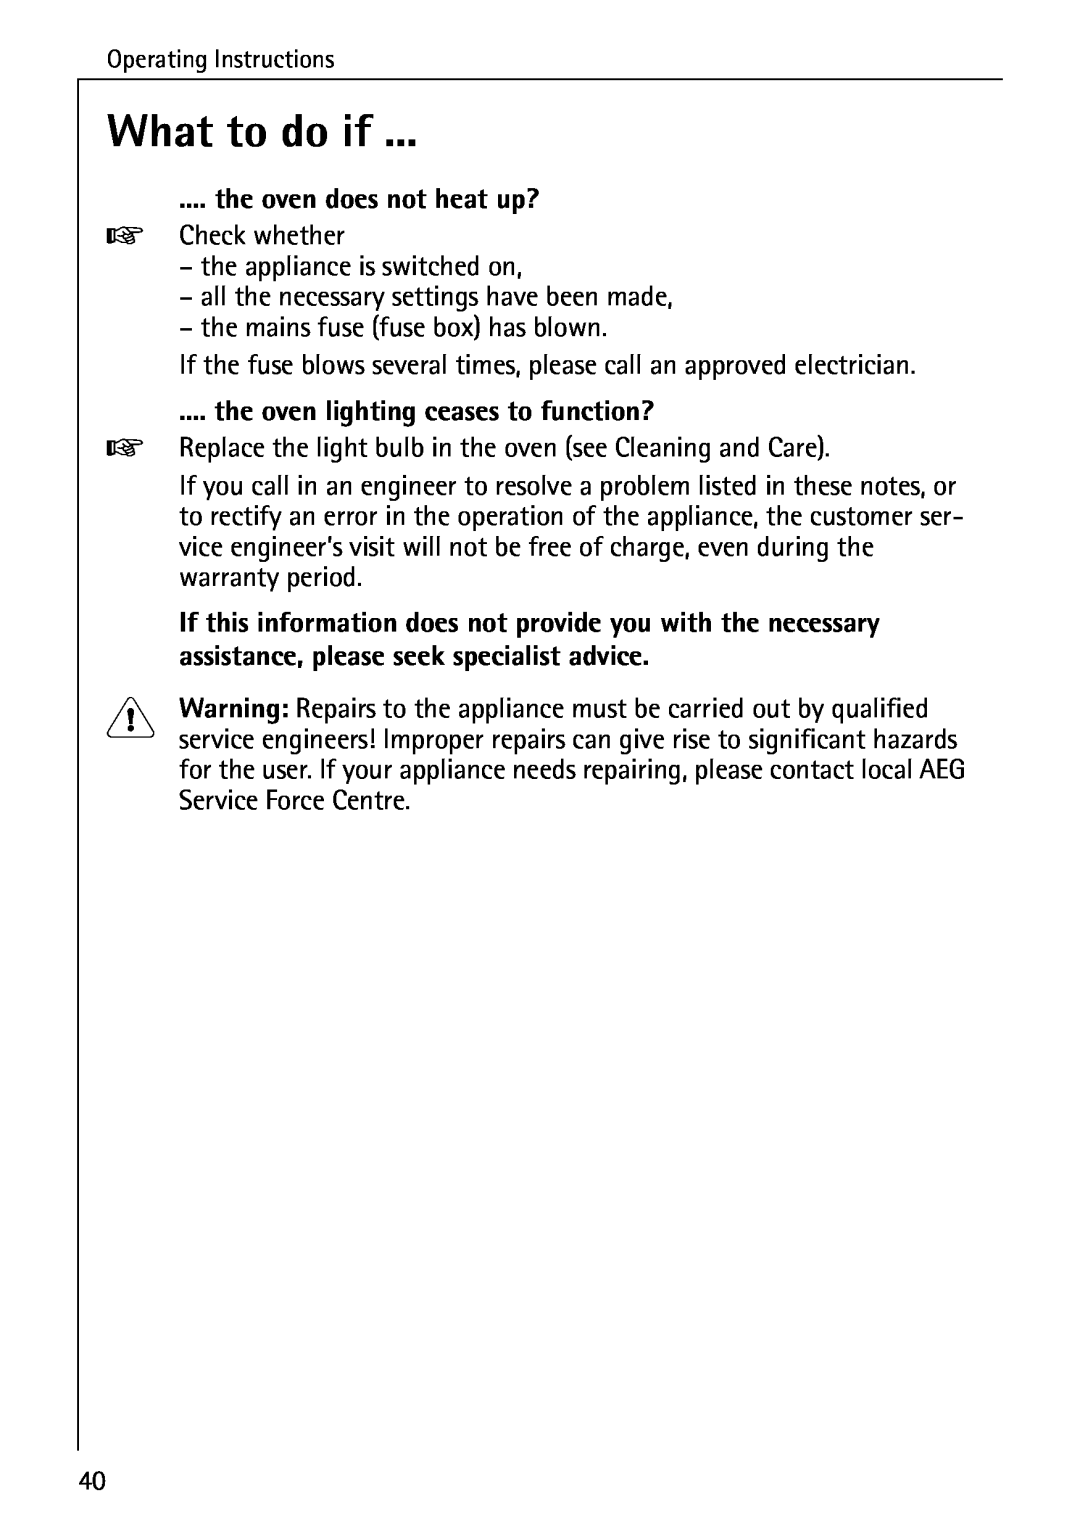 AEG B 2100 operating instructions What to do if, the oven does not heat up?, the oven lighting ceases to function? 